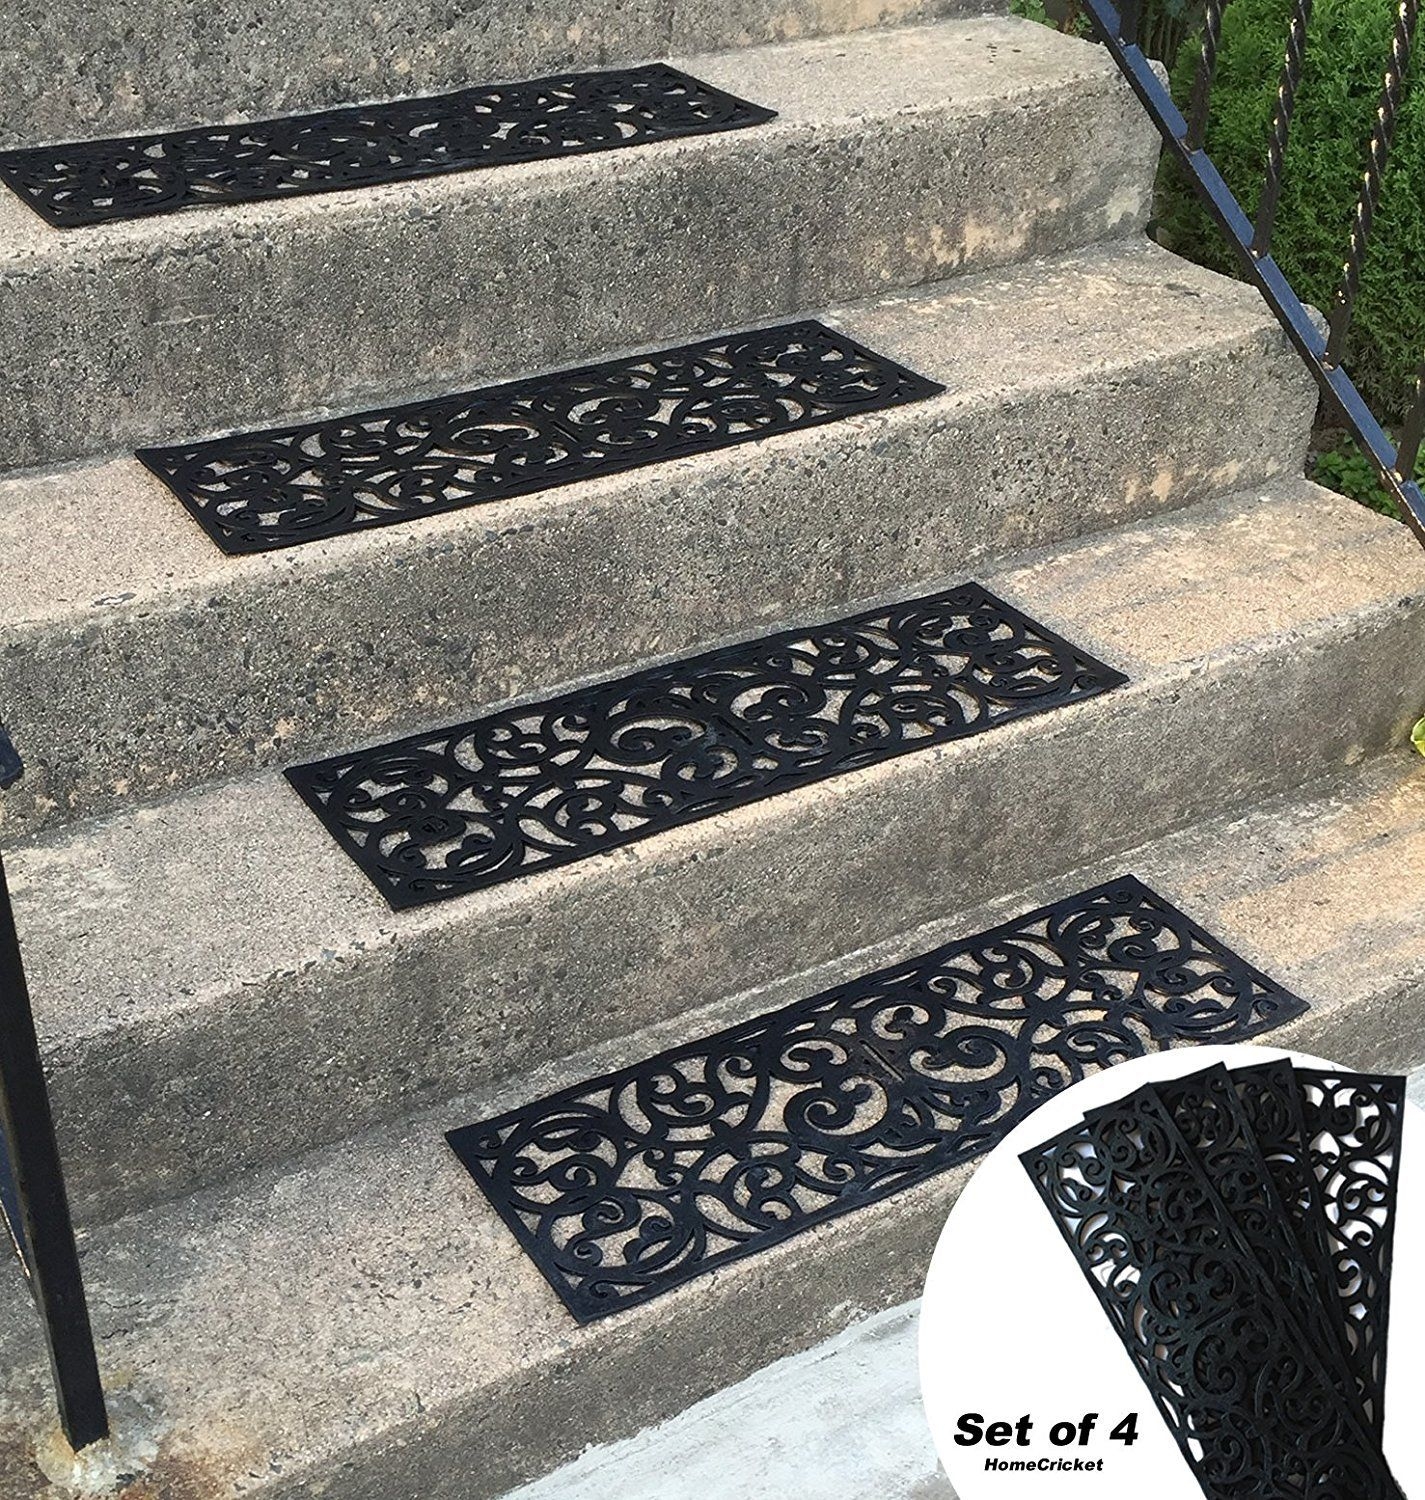 Outdoor Rubber Stair Treads 5 Black Rubber Treads per Box with Screws and Washers Included Heavy Duty Anti Skid Strips for Outside Use 4x24-inch Textured Non-Slip Mats for Staircase